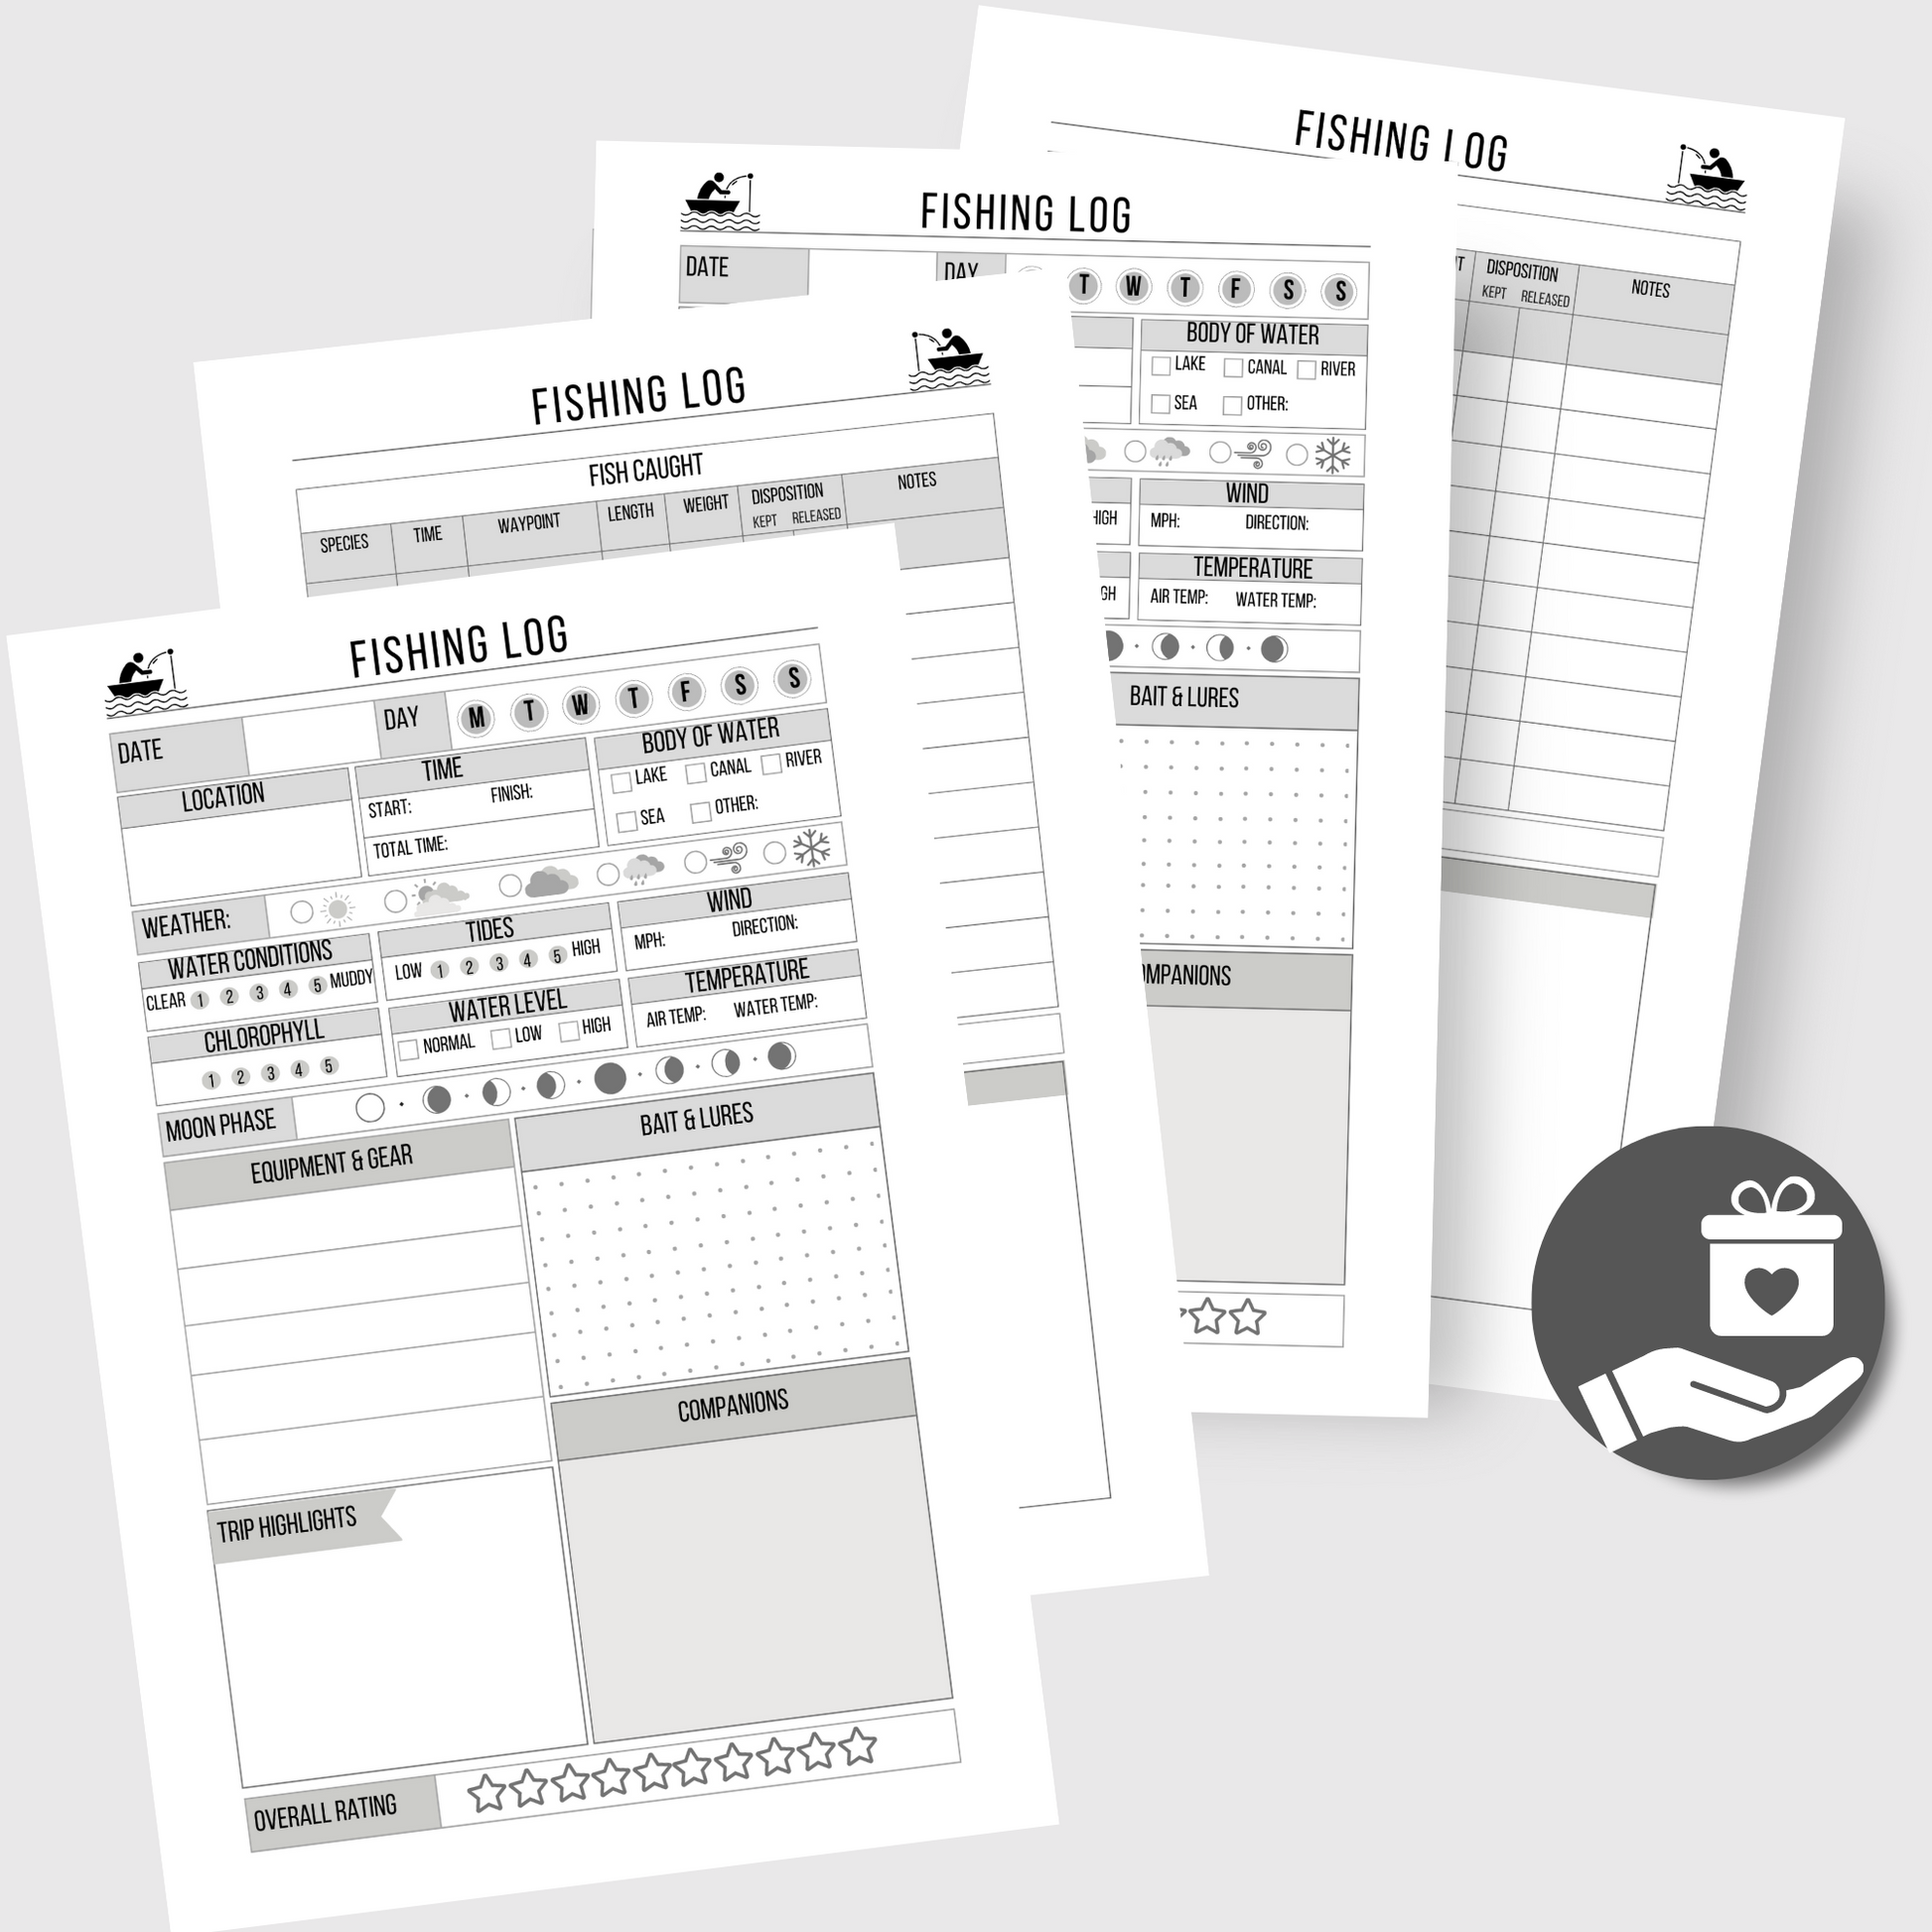 A Fishing Logbook is a Record of Your Fishing Tips